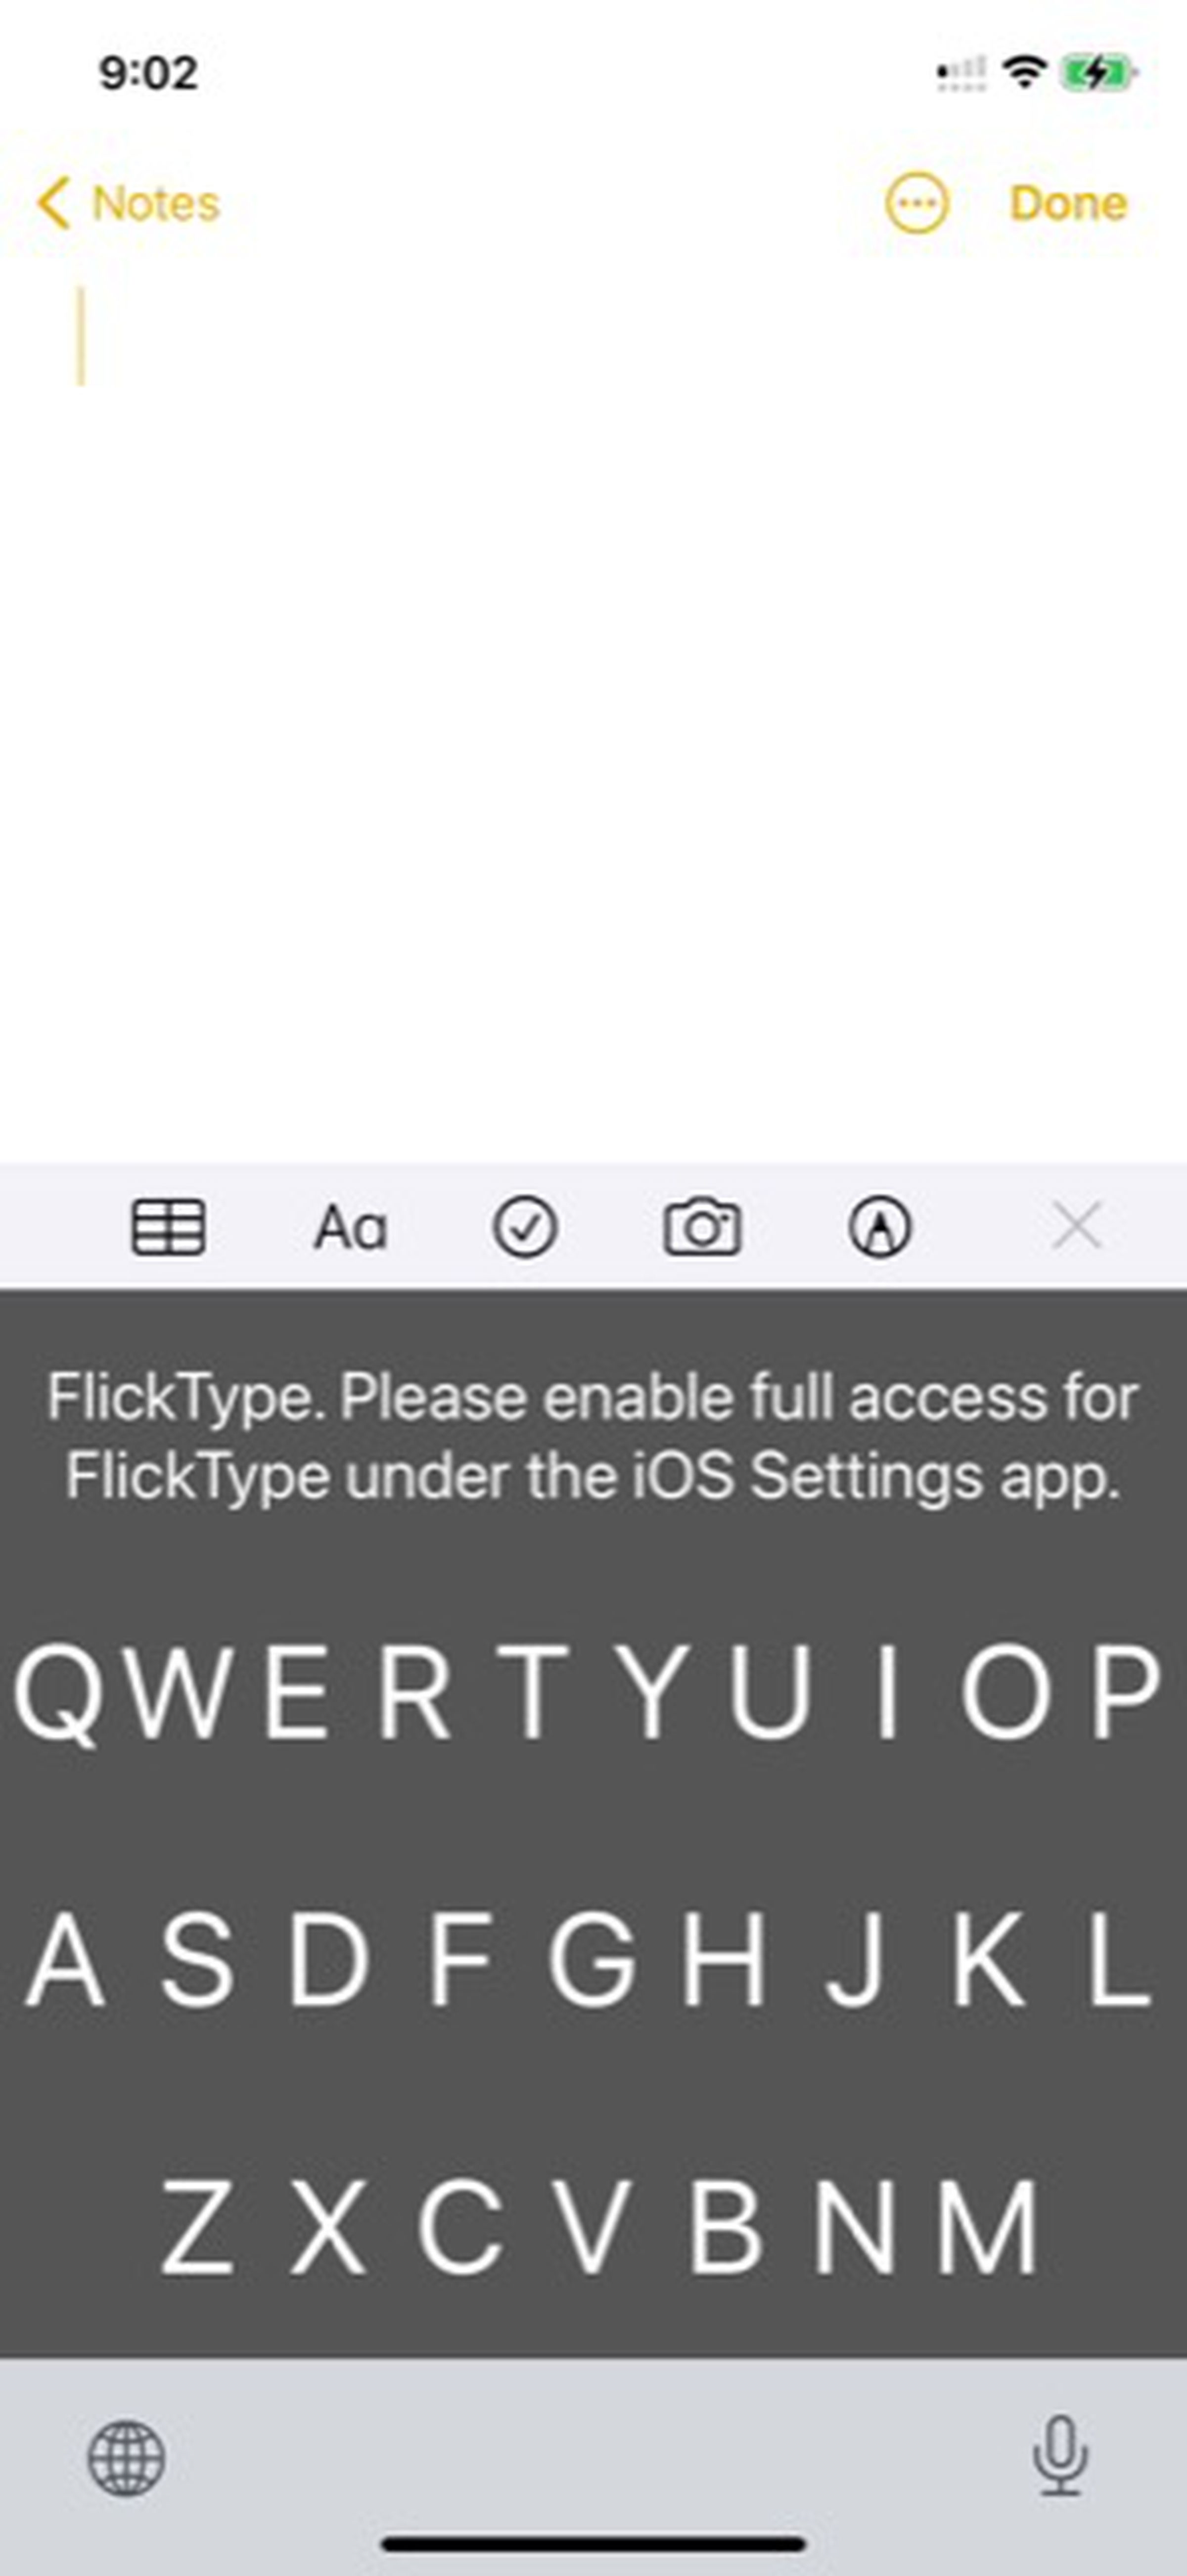 The screenshot says “please enable full access for FlickType under the iOS Settings app.”